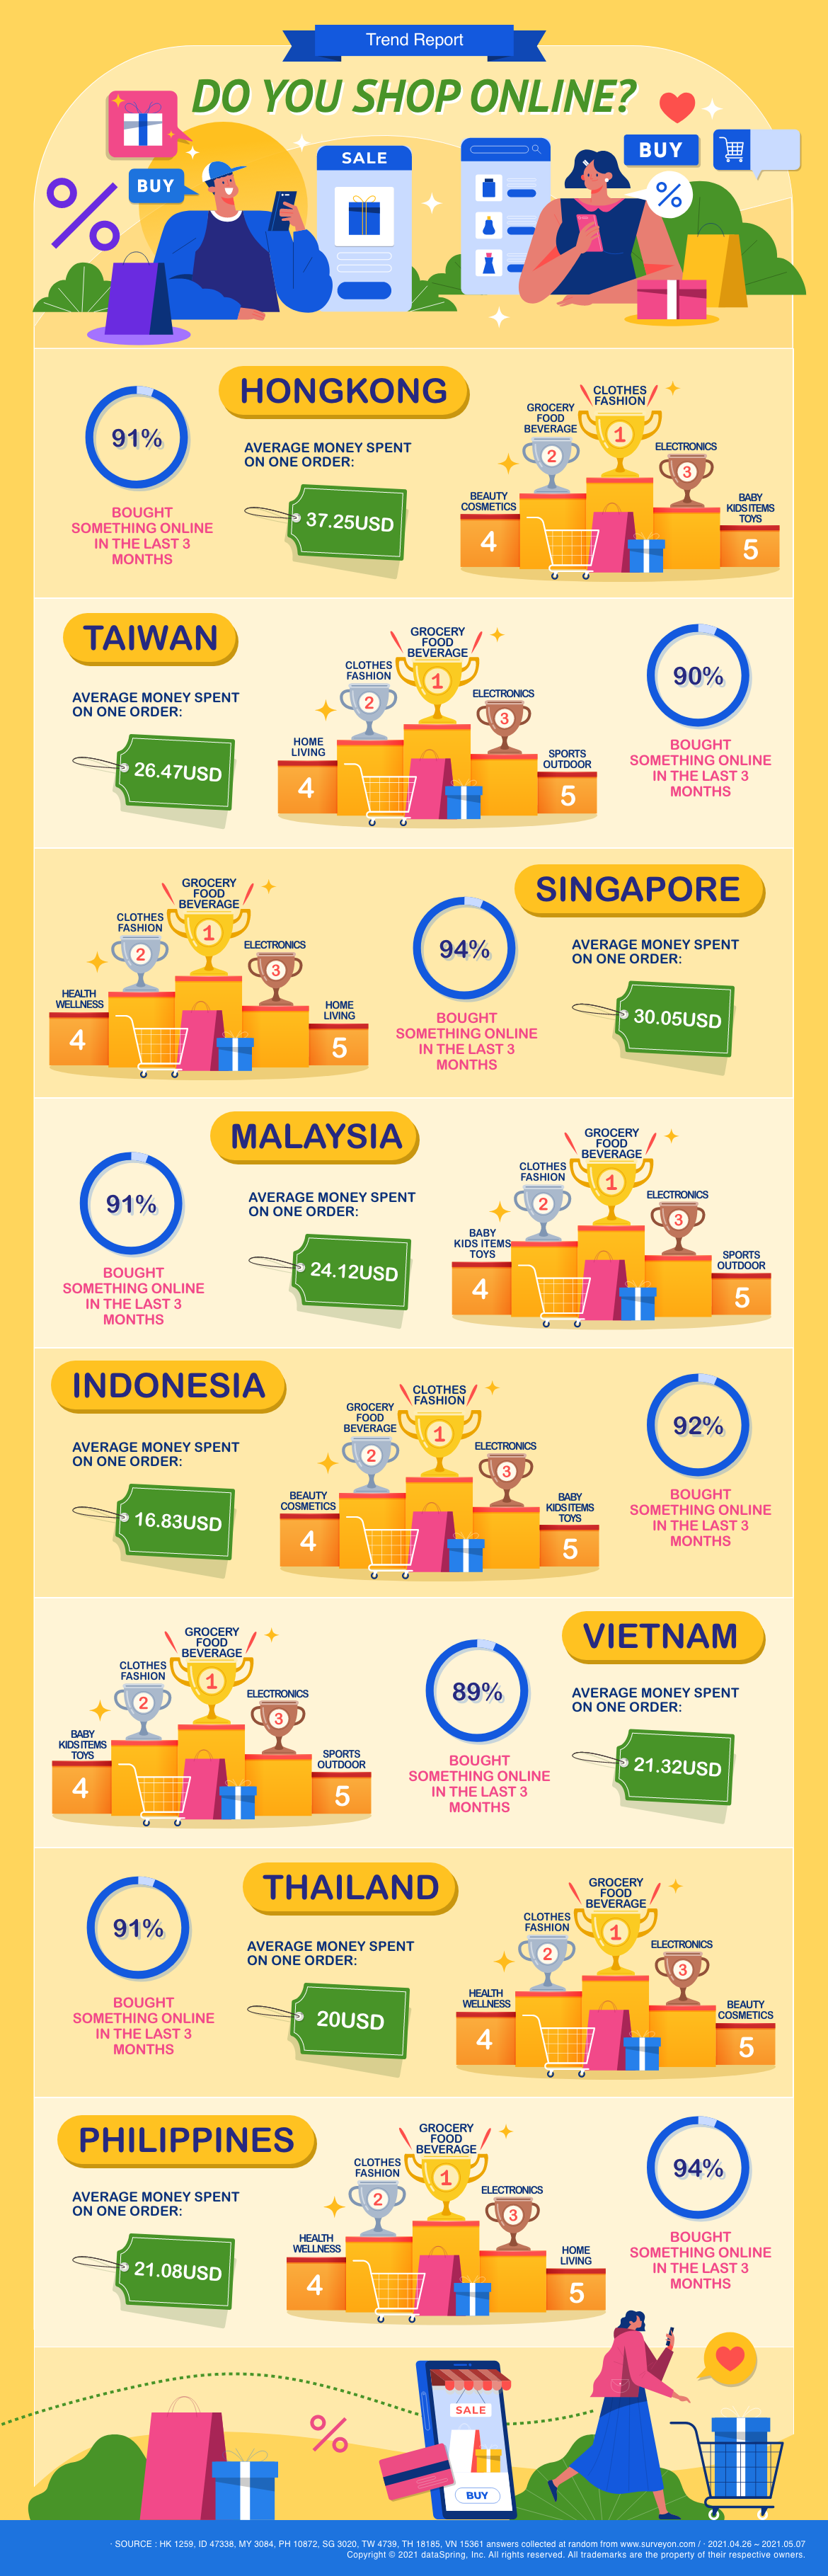 [Infographic] Asia Research Poll: Do You Shop Online?